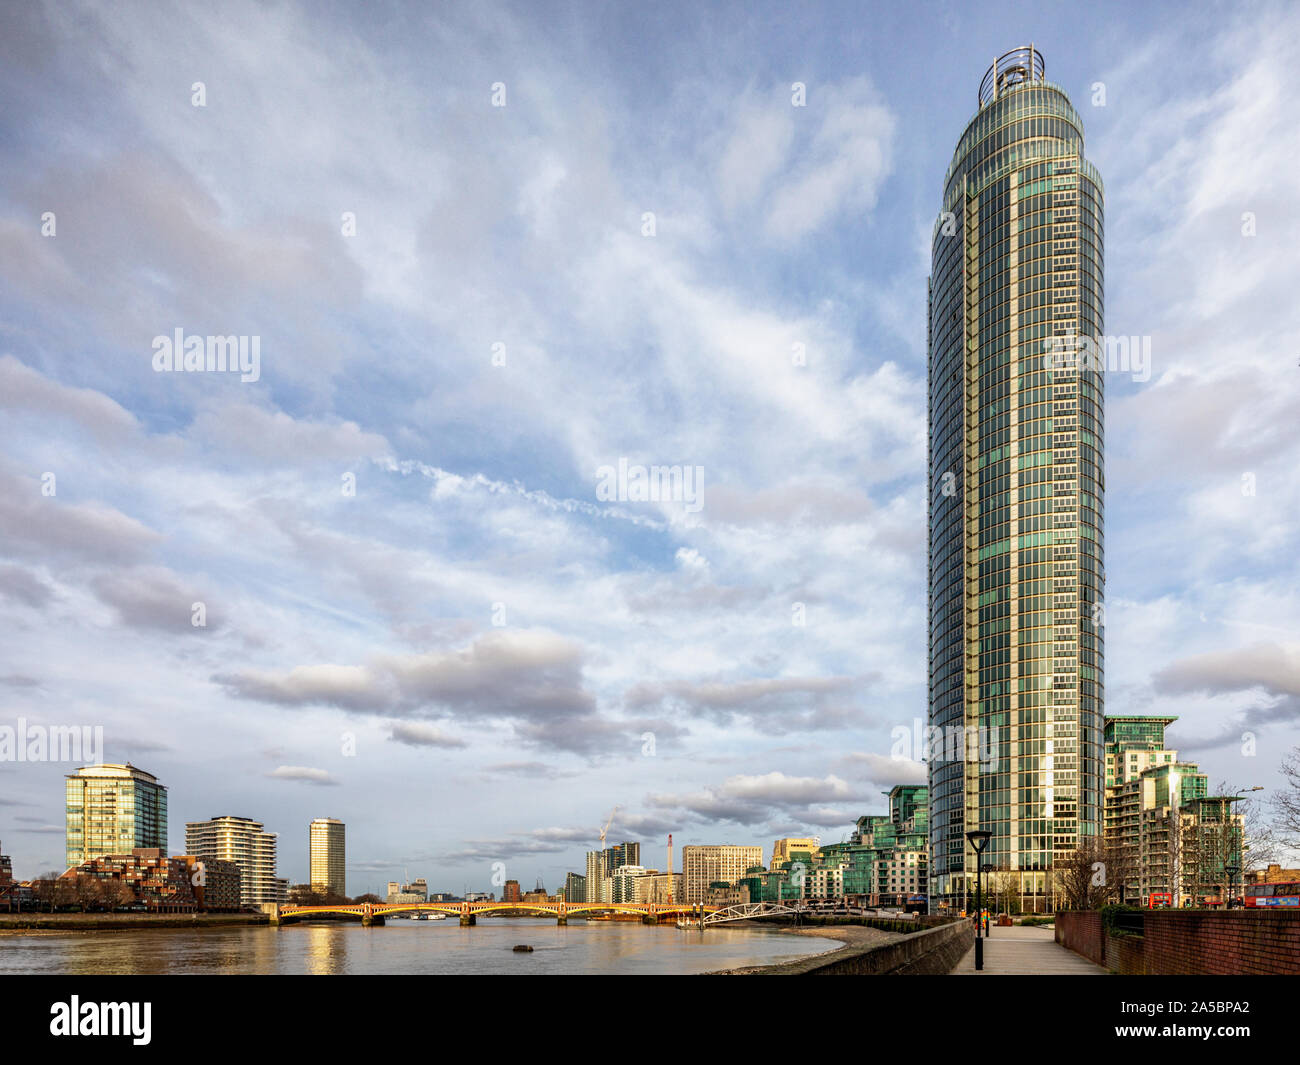 St George Wharf Tower, also known as the Vauxhall Tower, is a residential skyscraper in Vauxhall, London, and part of the St George Wharf development. Stock Photo